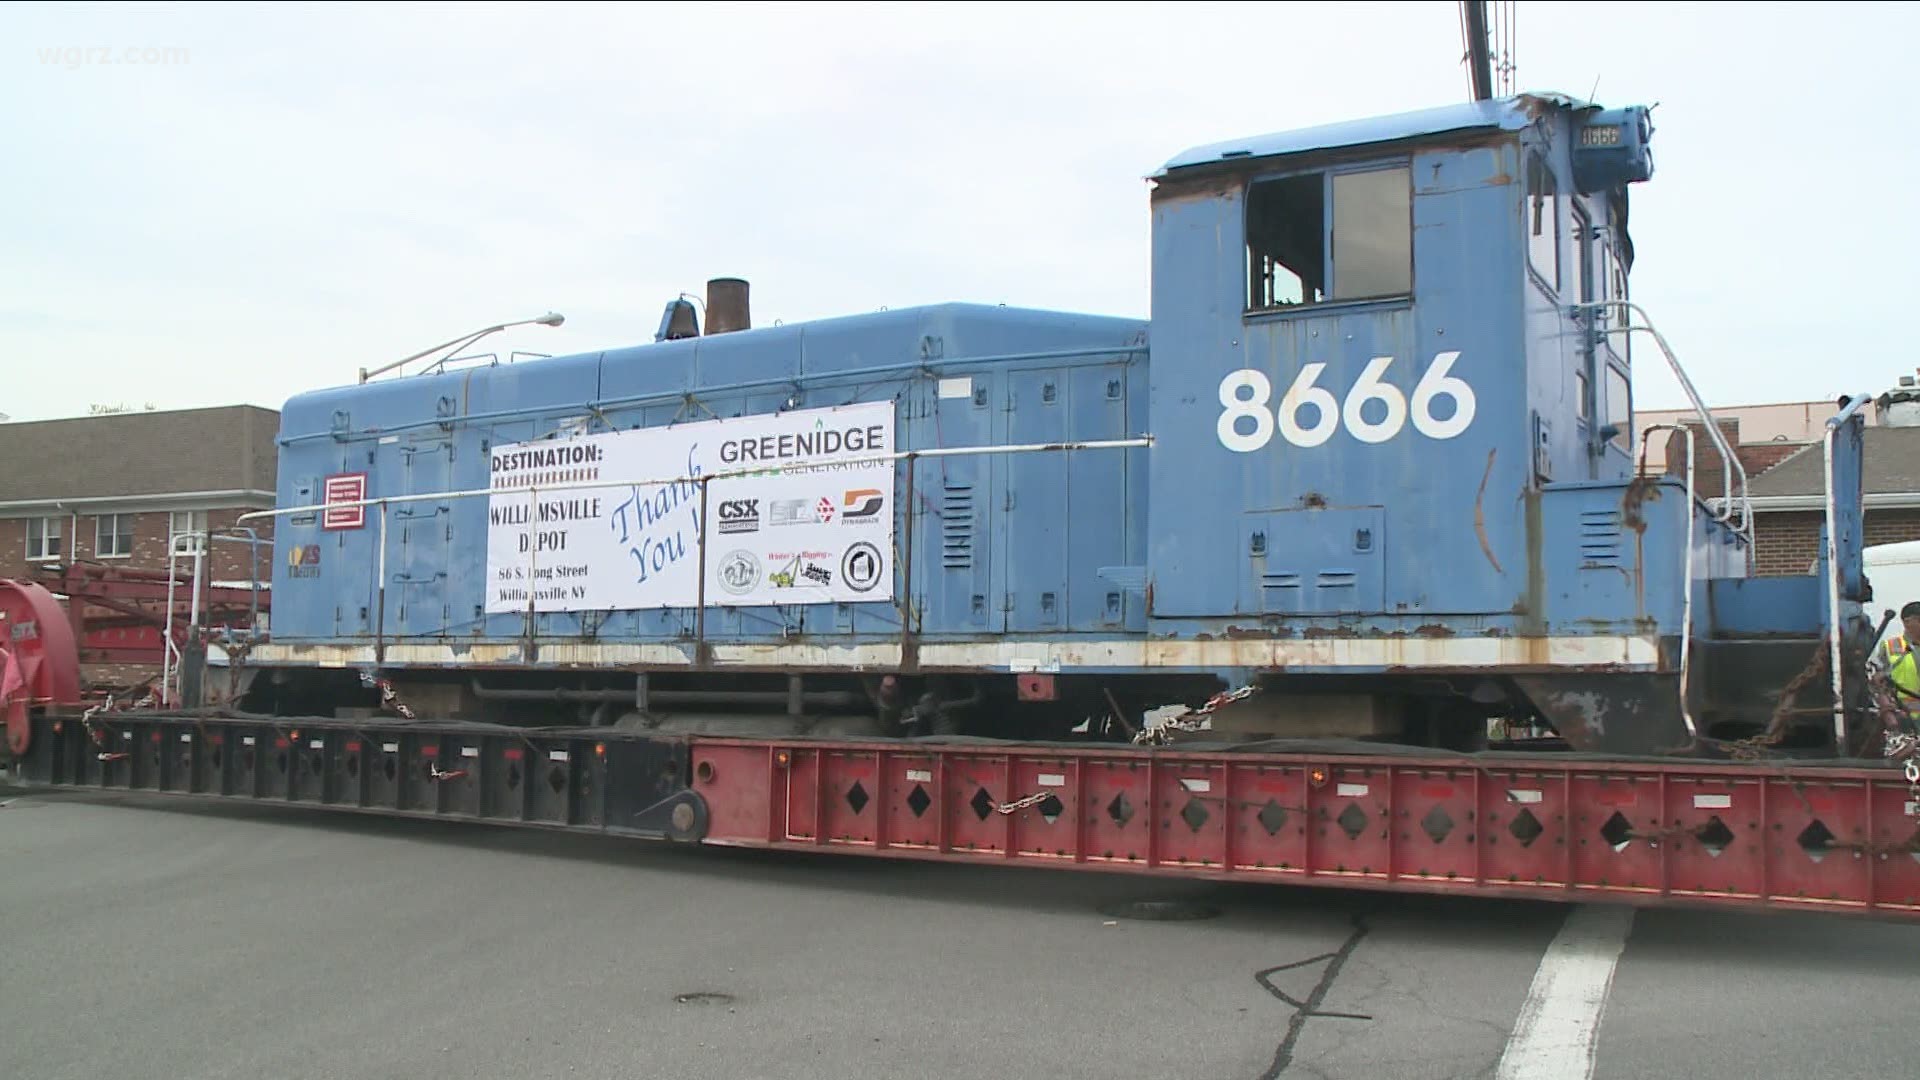 The Western New York Railway Historical Society's Vice President Marty Visciano says they're going to spend the next year restoring it.